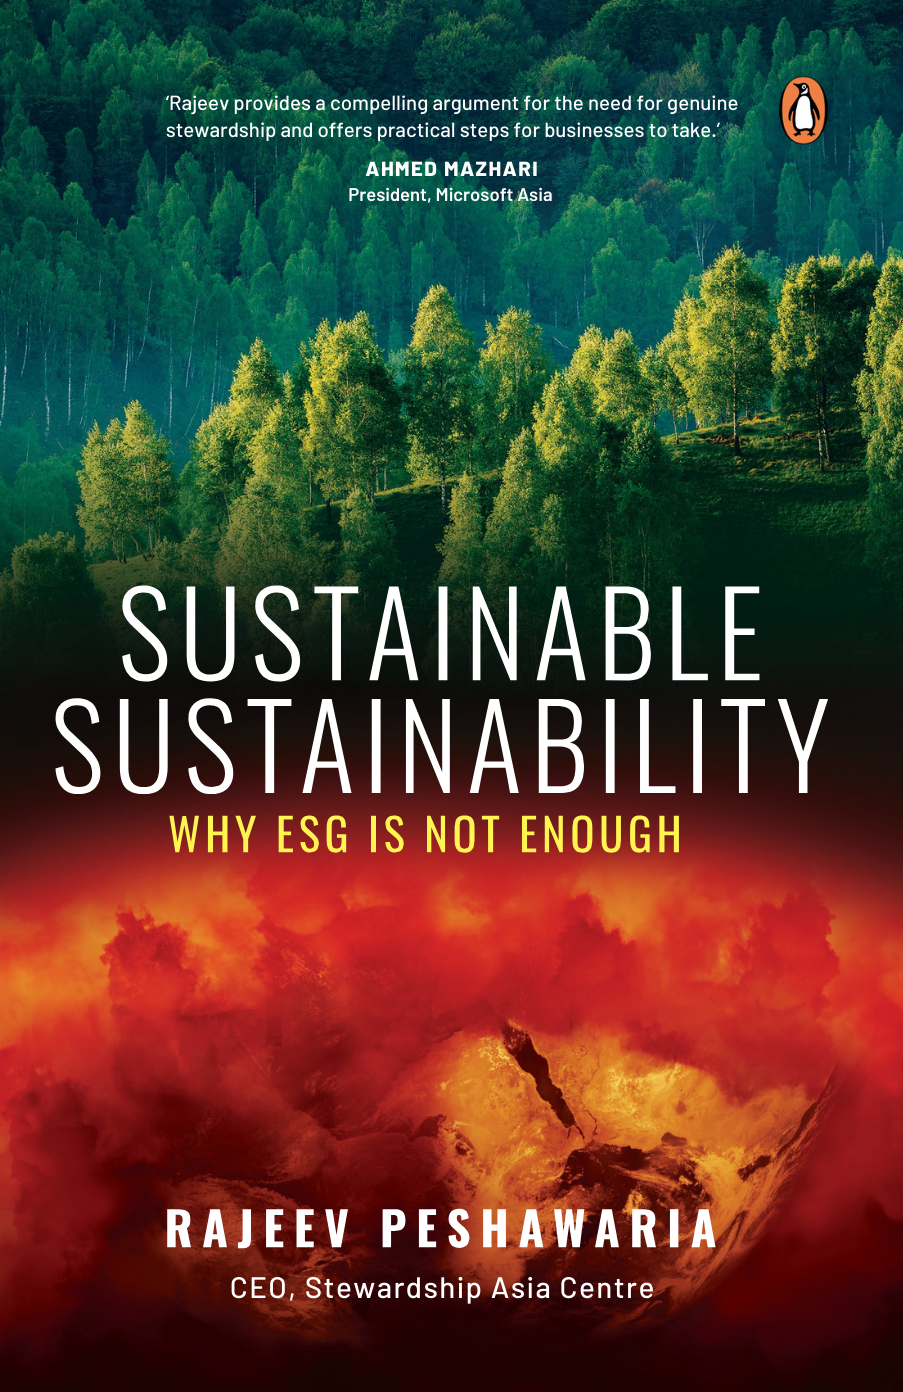 Launch of “Sustainable Sustainability”– a playbook on marrying profit and purpose